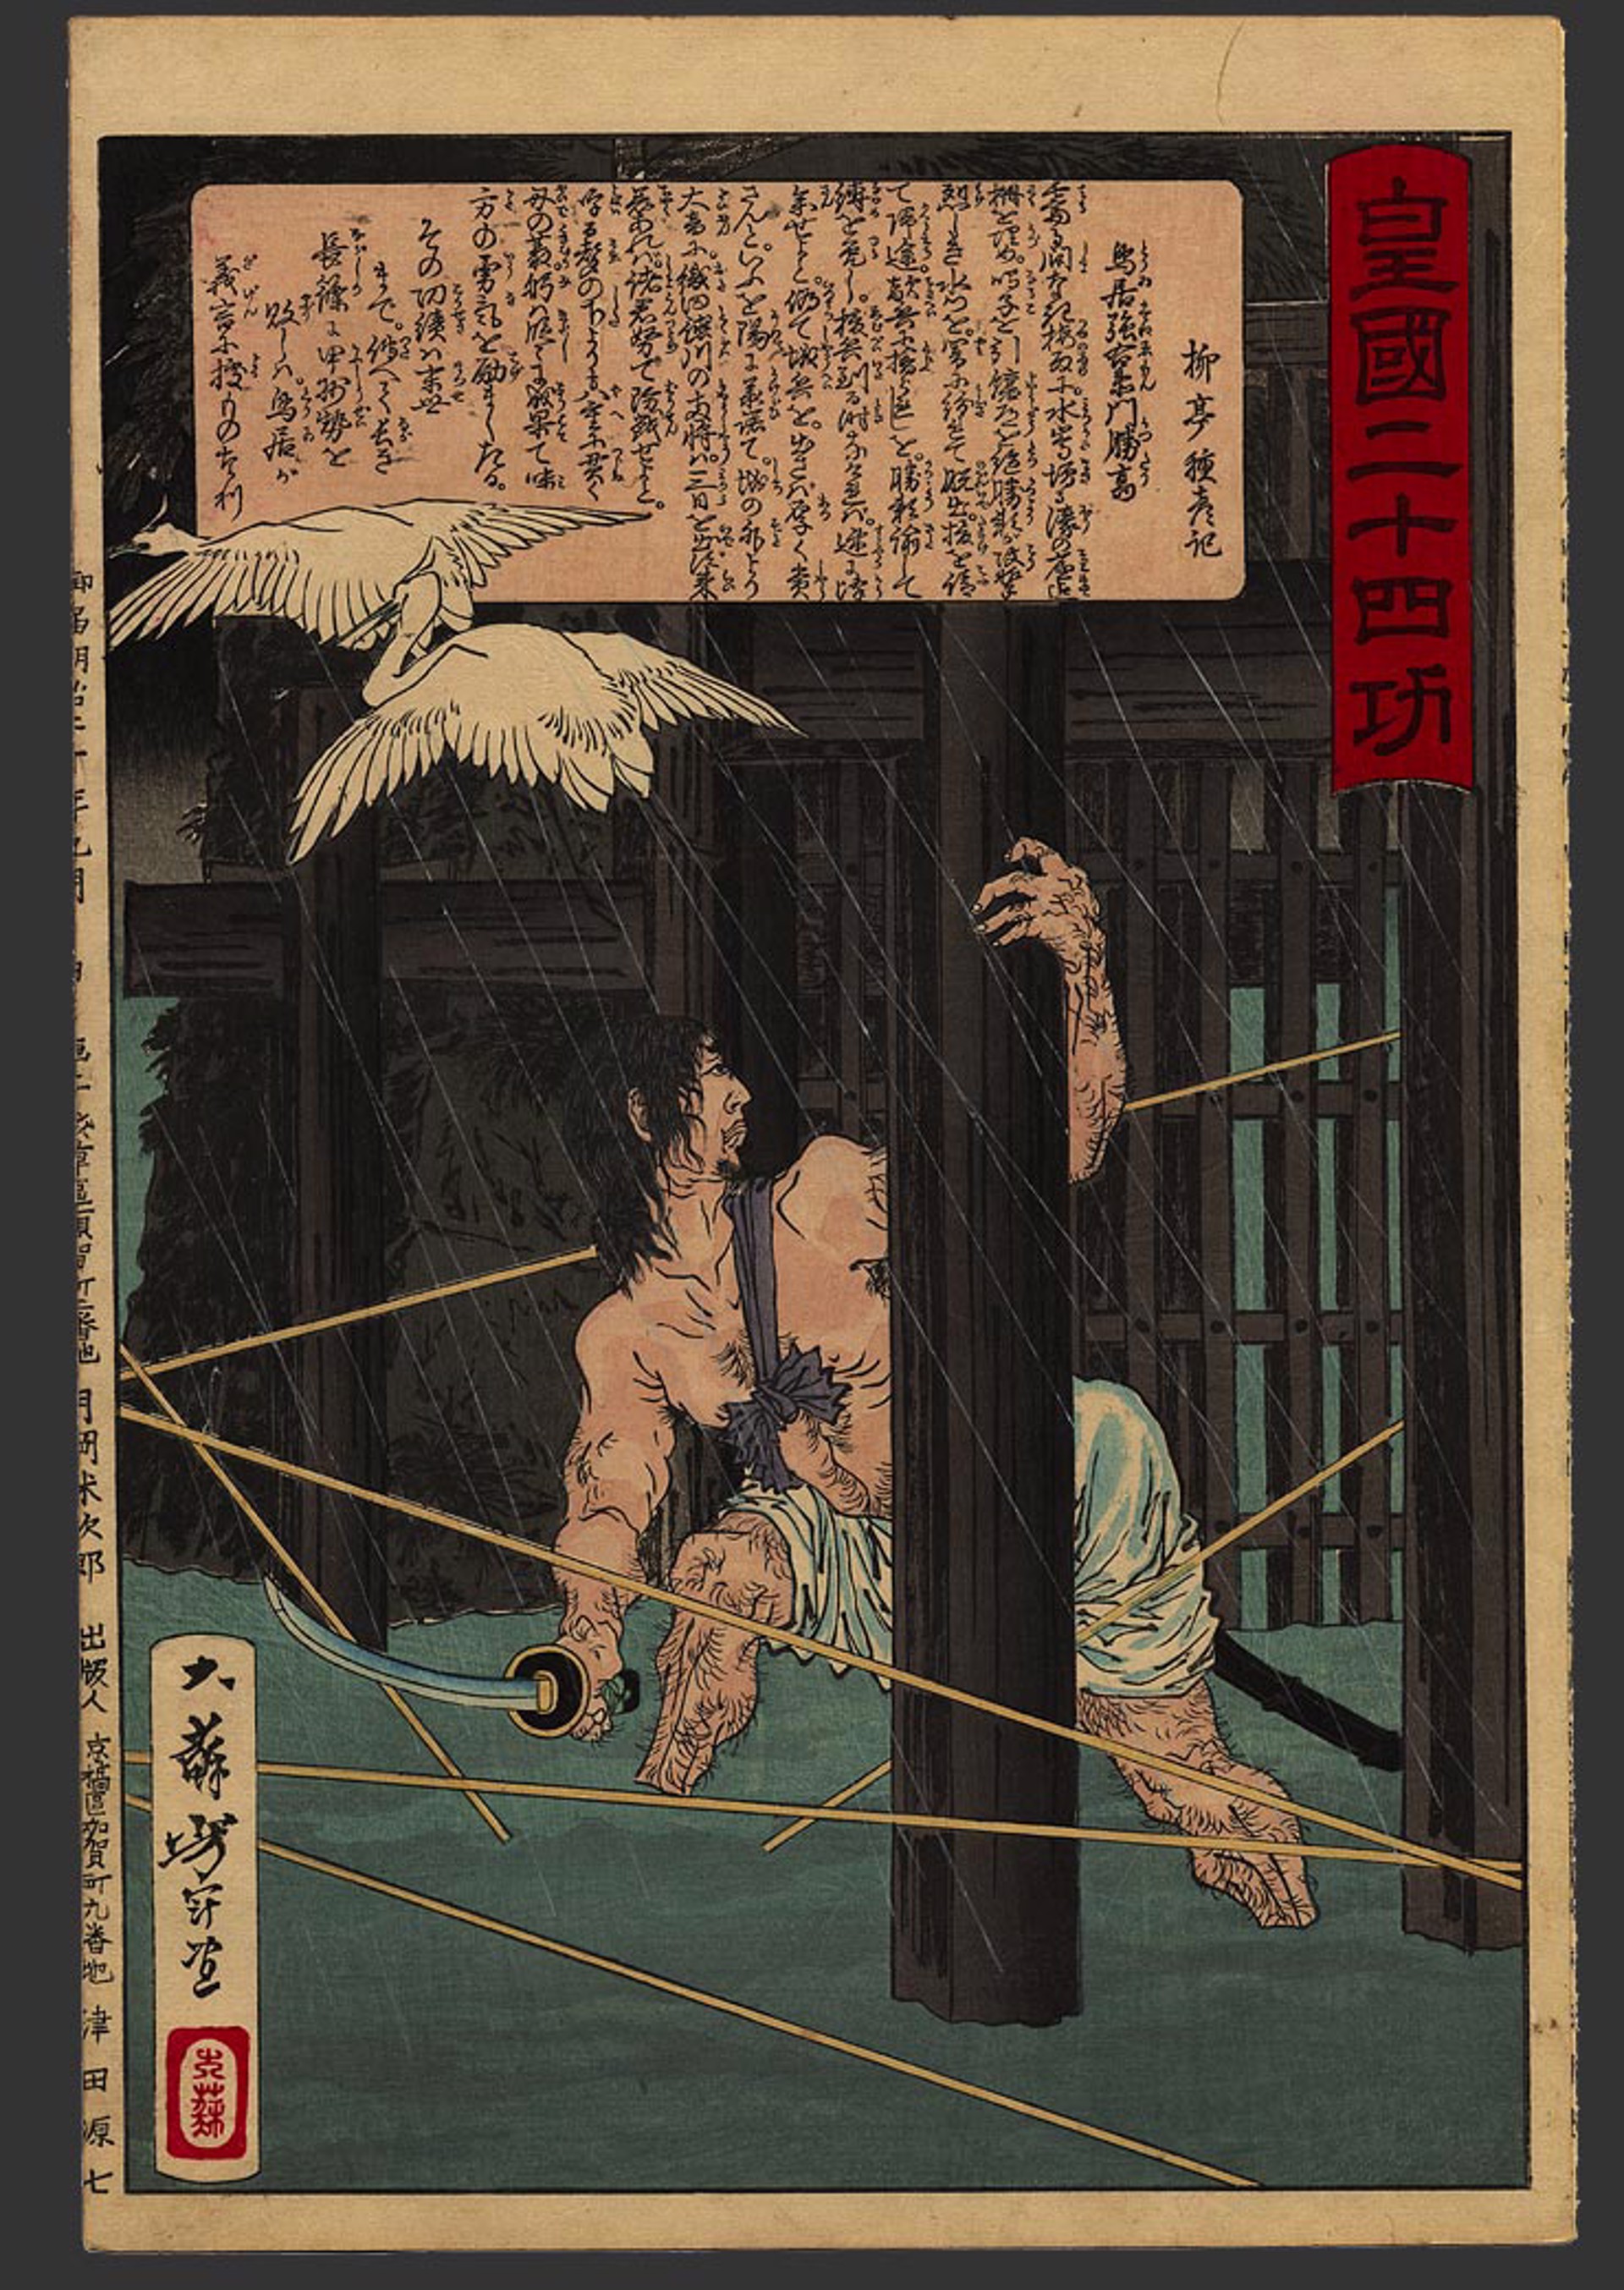 #23 Torii Suneemon Katsukata leaving his masters castle. 24 Accomplishments in Imperial Japan by Yoshitoshi